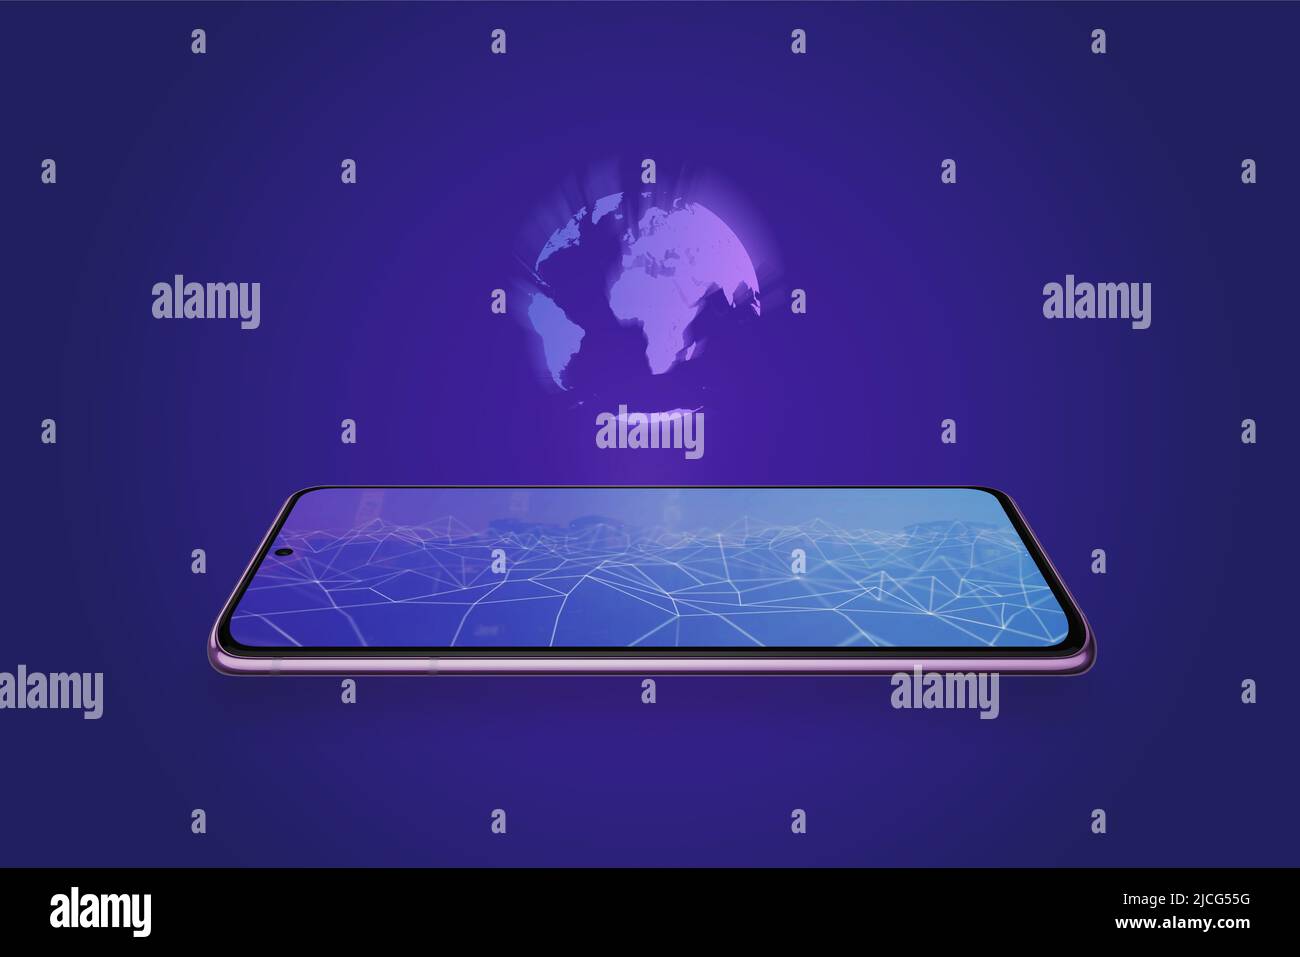 Projection of the planet from a mobile phone display. Augmented reality technology on mobile. The concept of metaverse virtual reality technology. Stock Photo